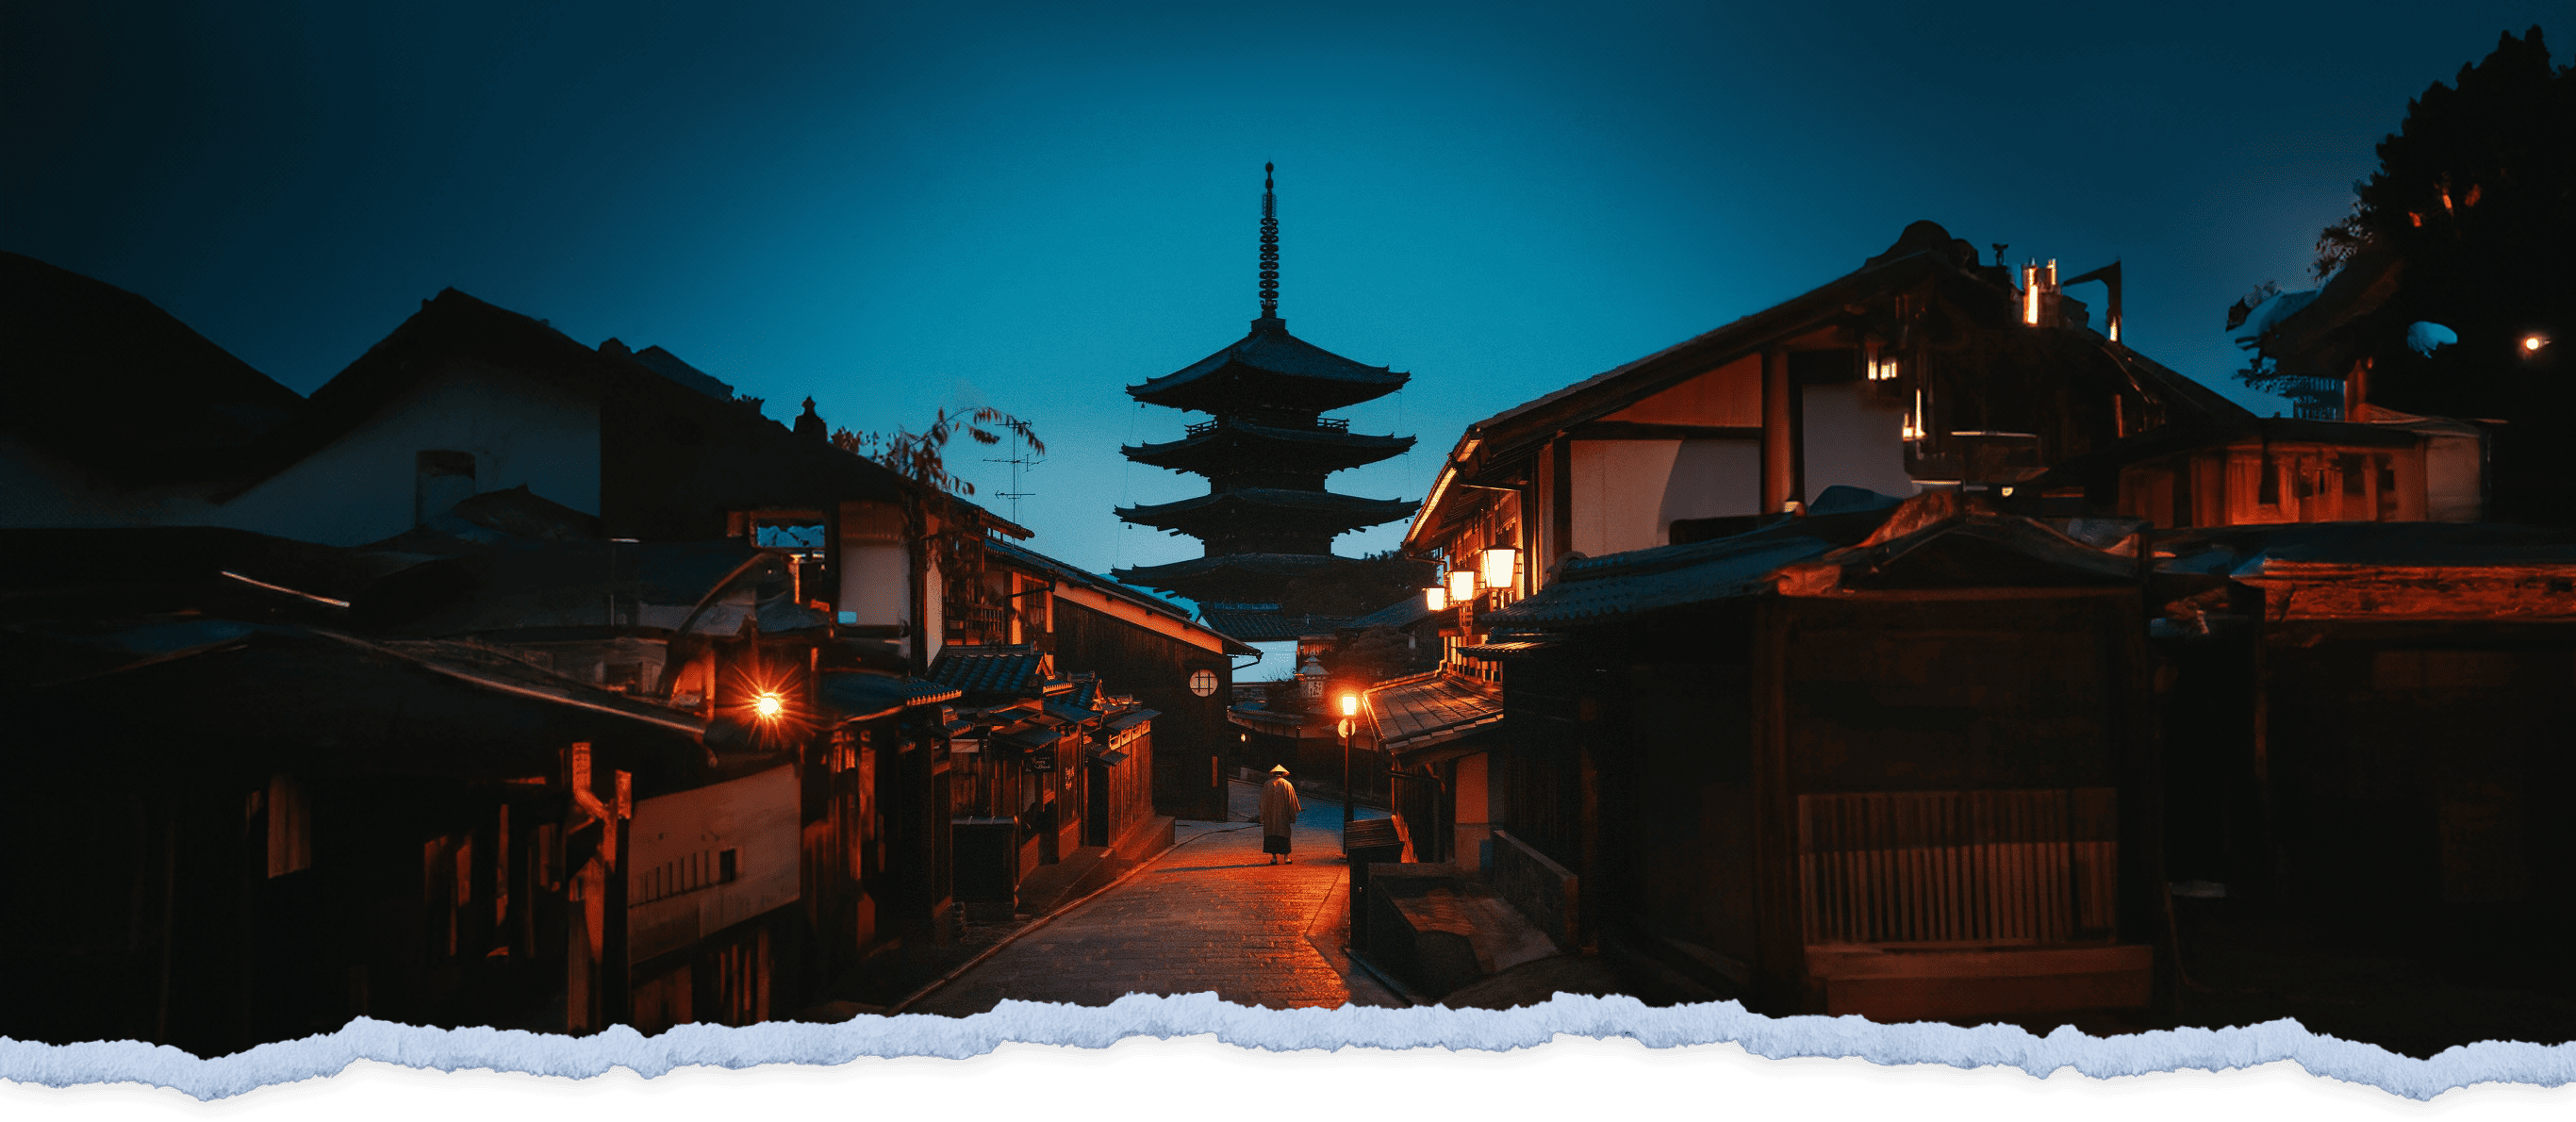 Nighttime view of a traditional Japanese street with a five-tiered pagoda towering in the background and illuminated houses lining the street.